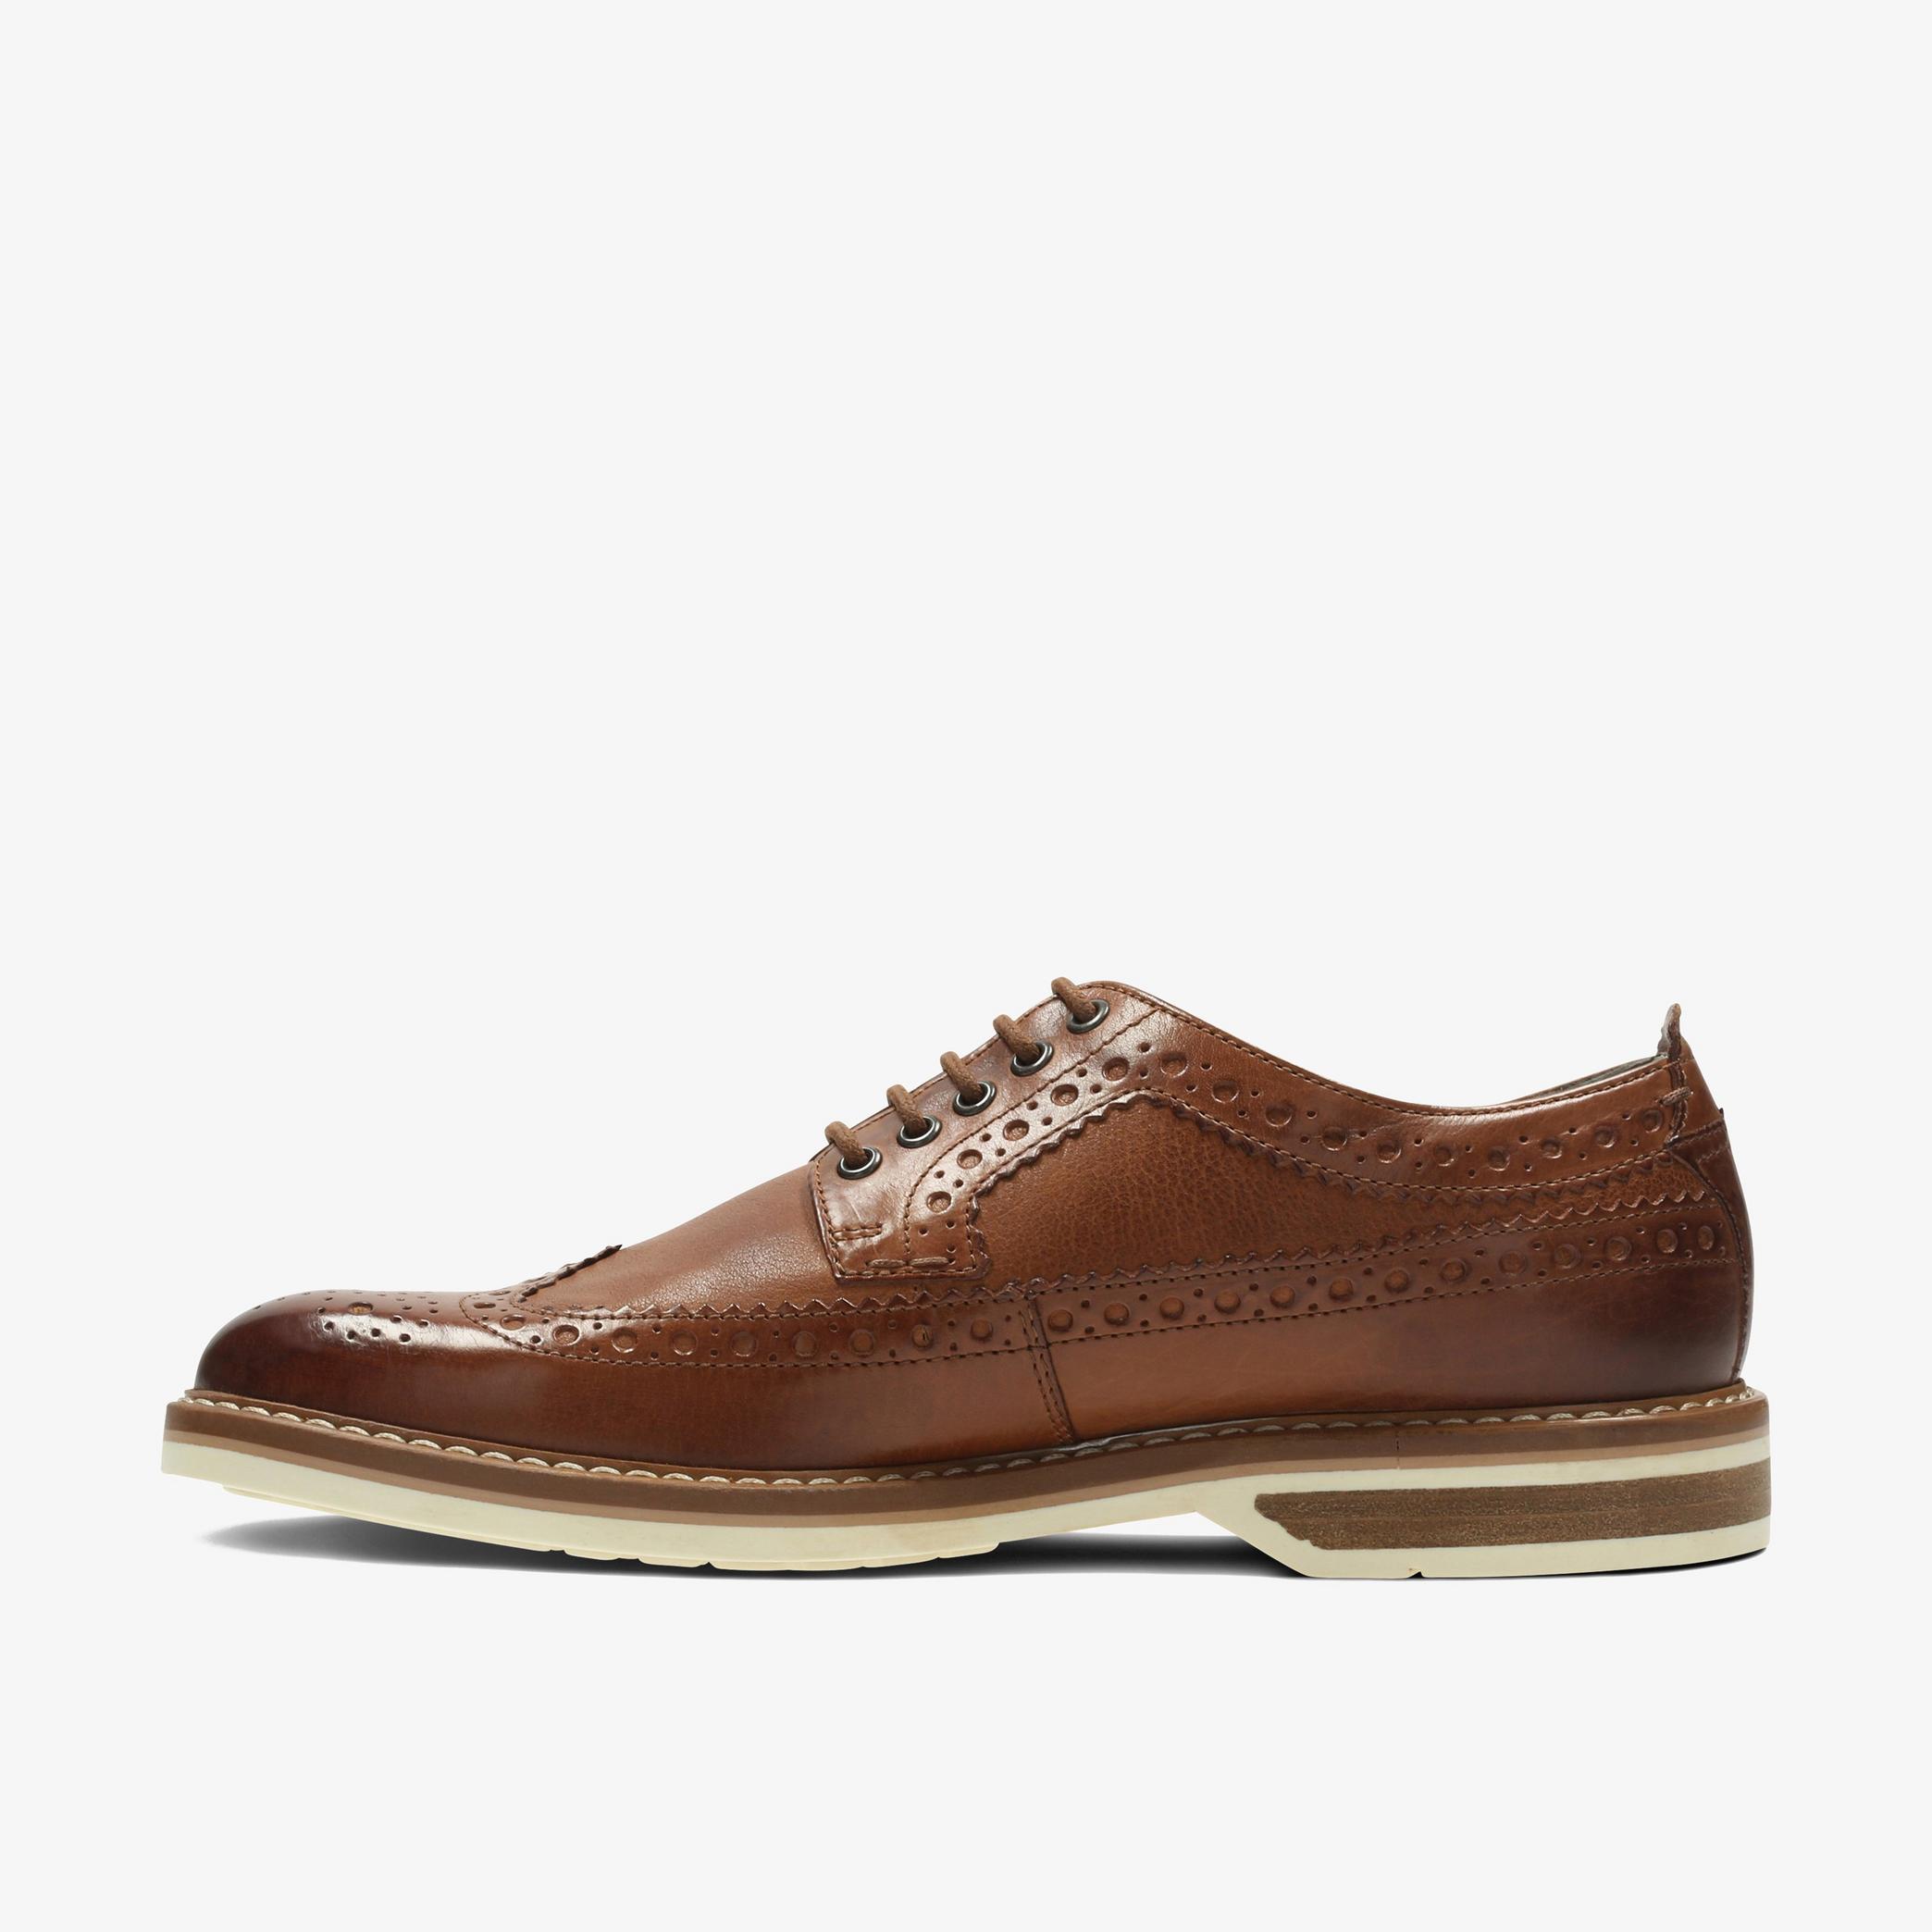 MENS Pitney Limit Tan Leather Shoes | Clarks Outlet